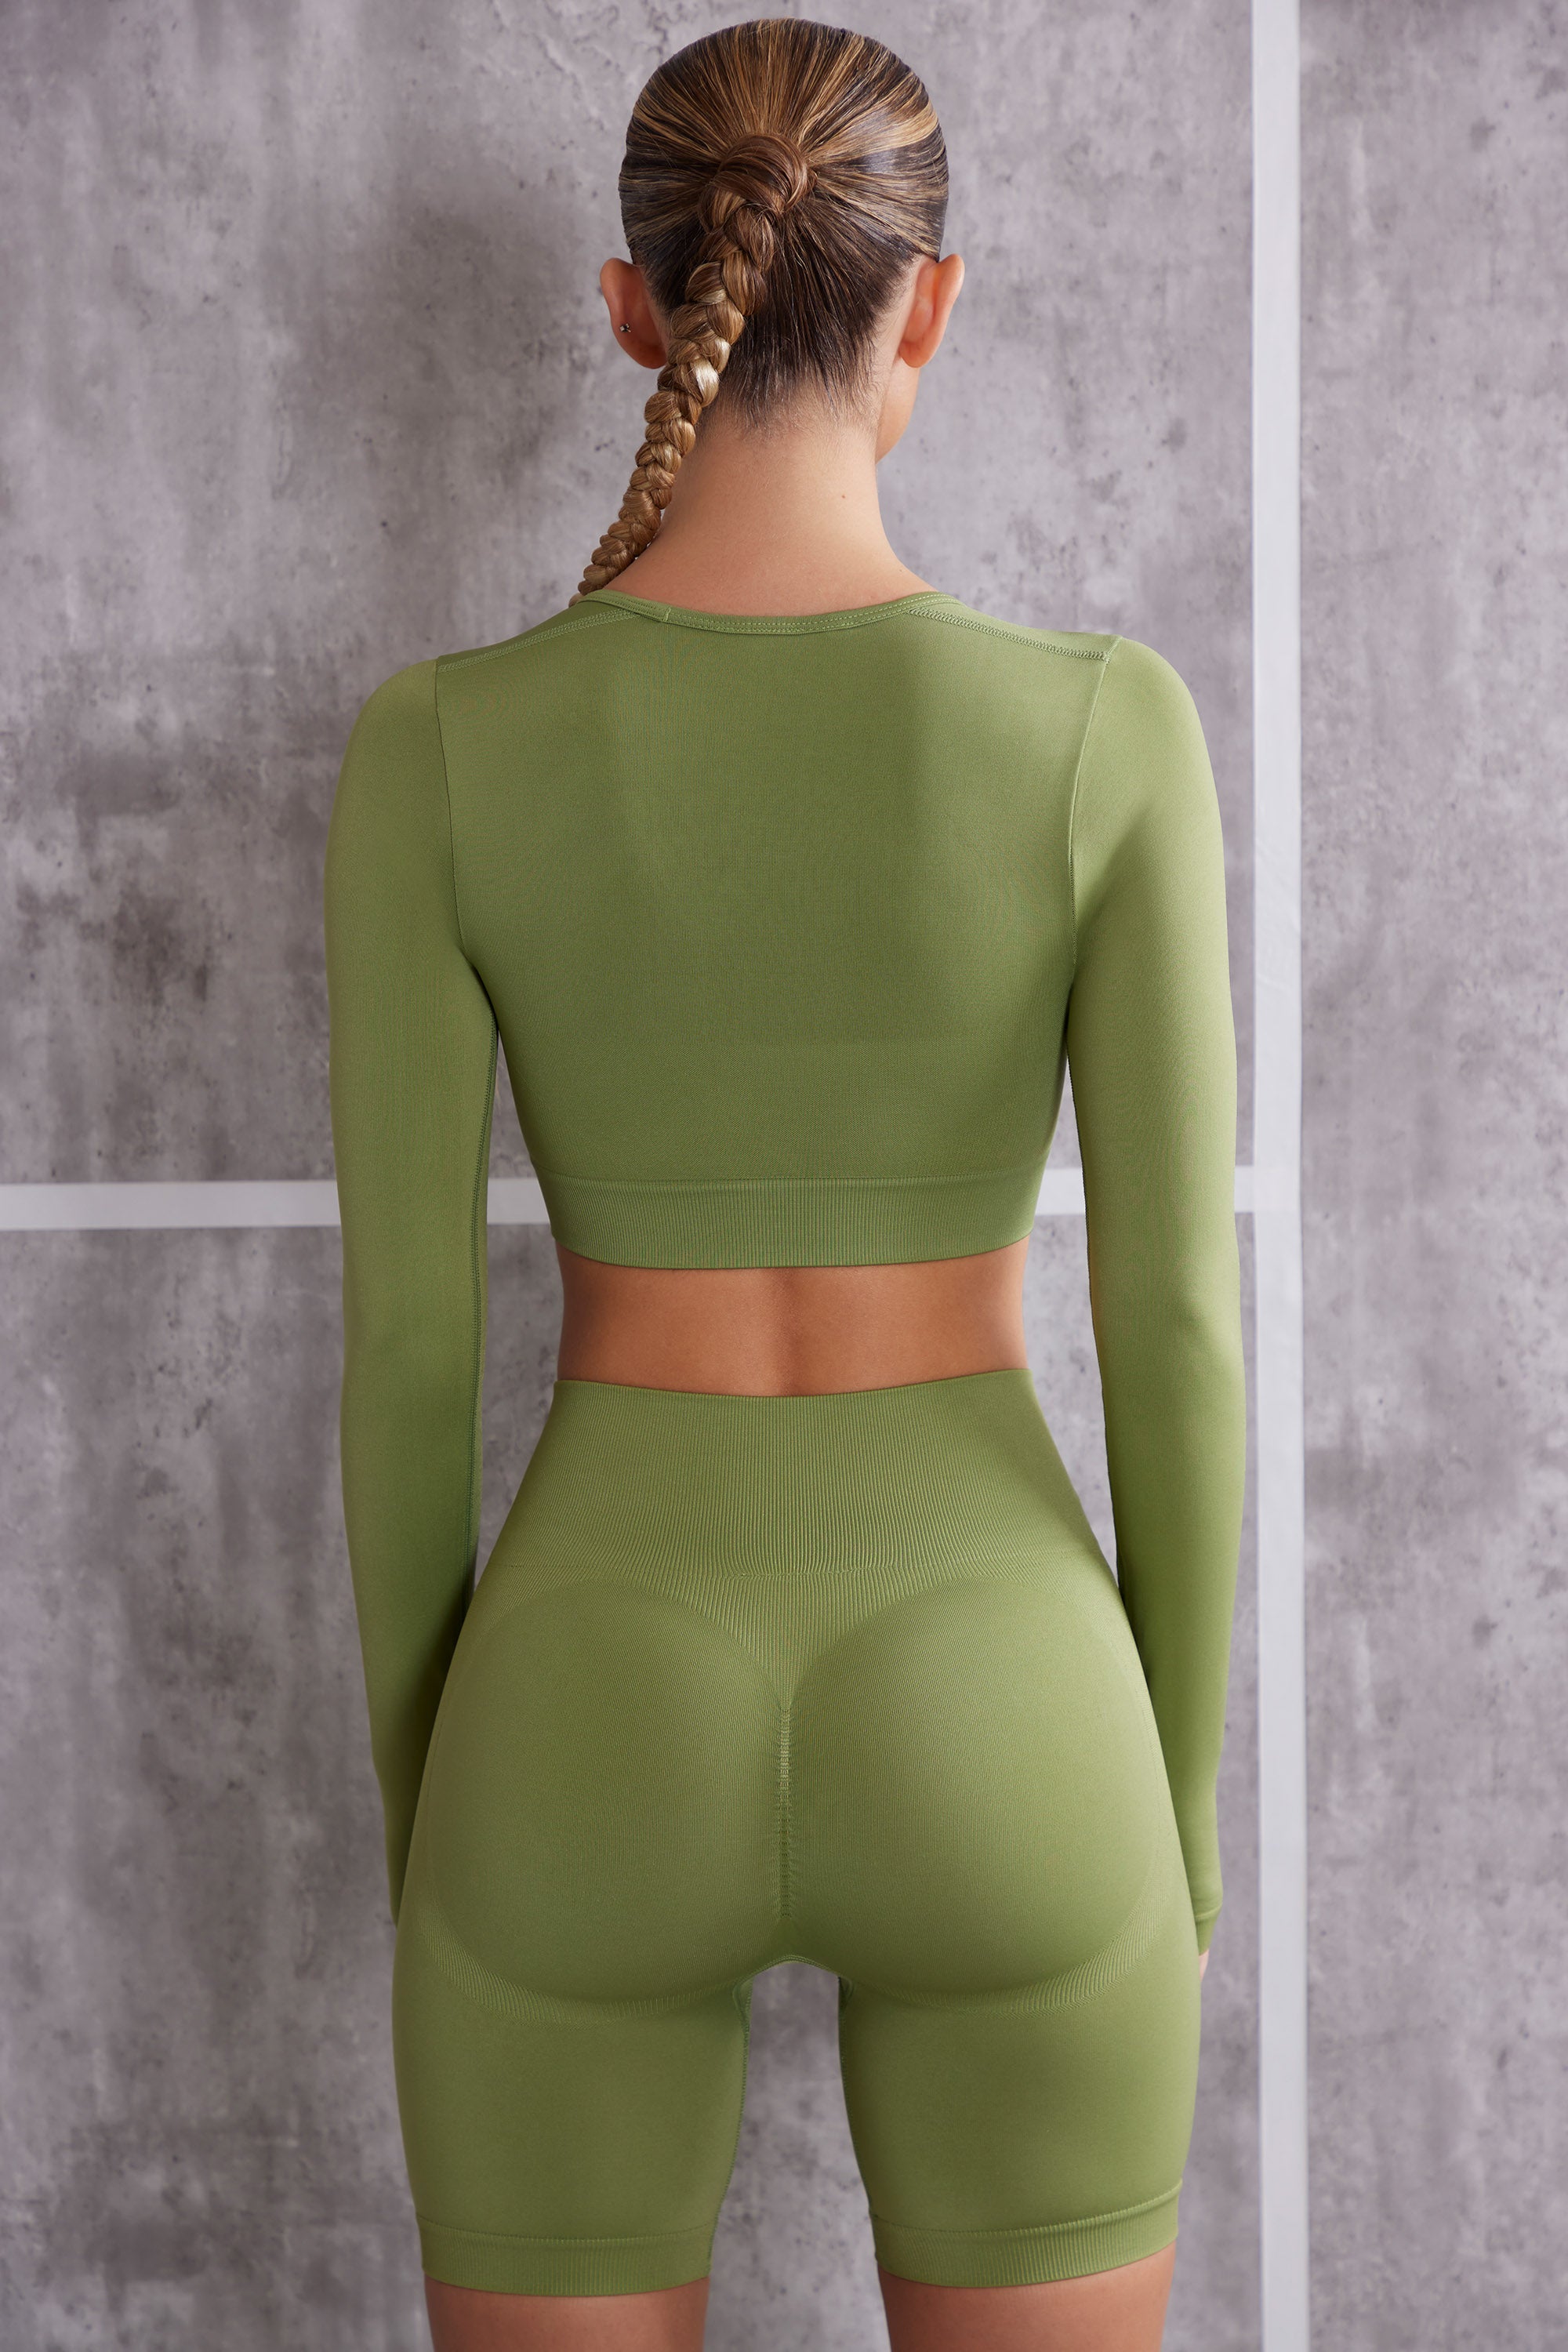 Get Into It Bra Top and Legging Set - Olive – shopcloud228